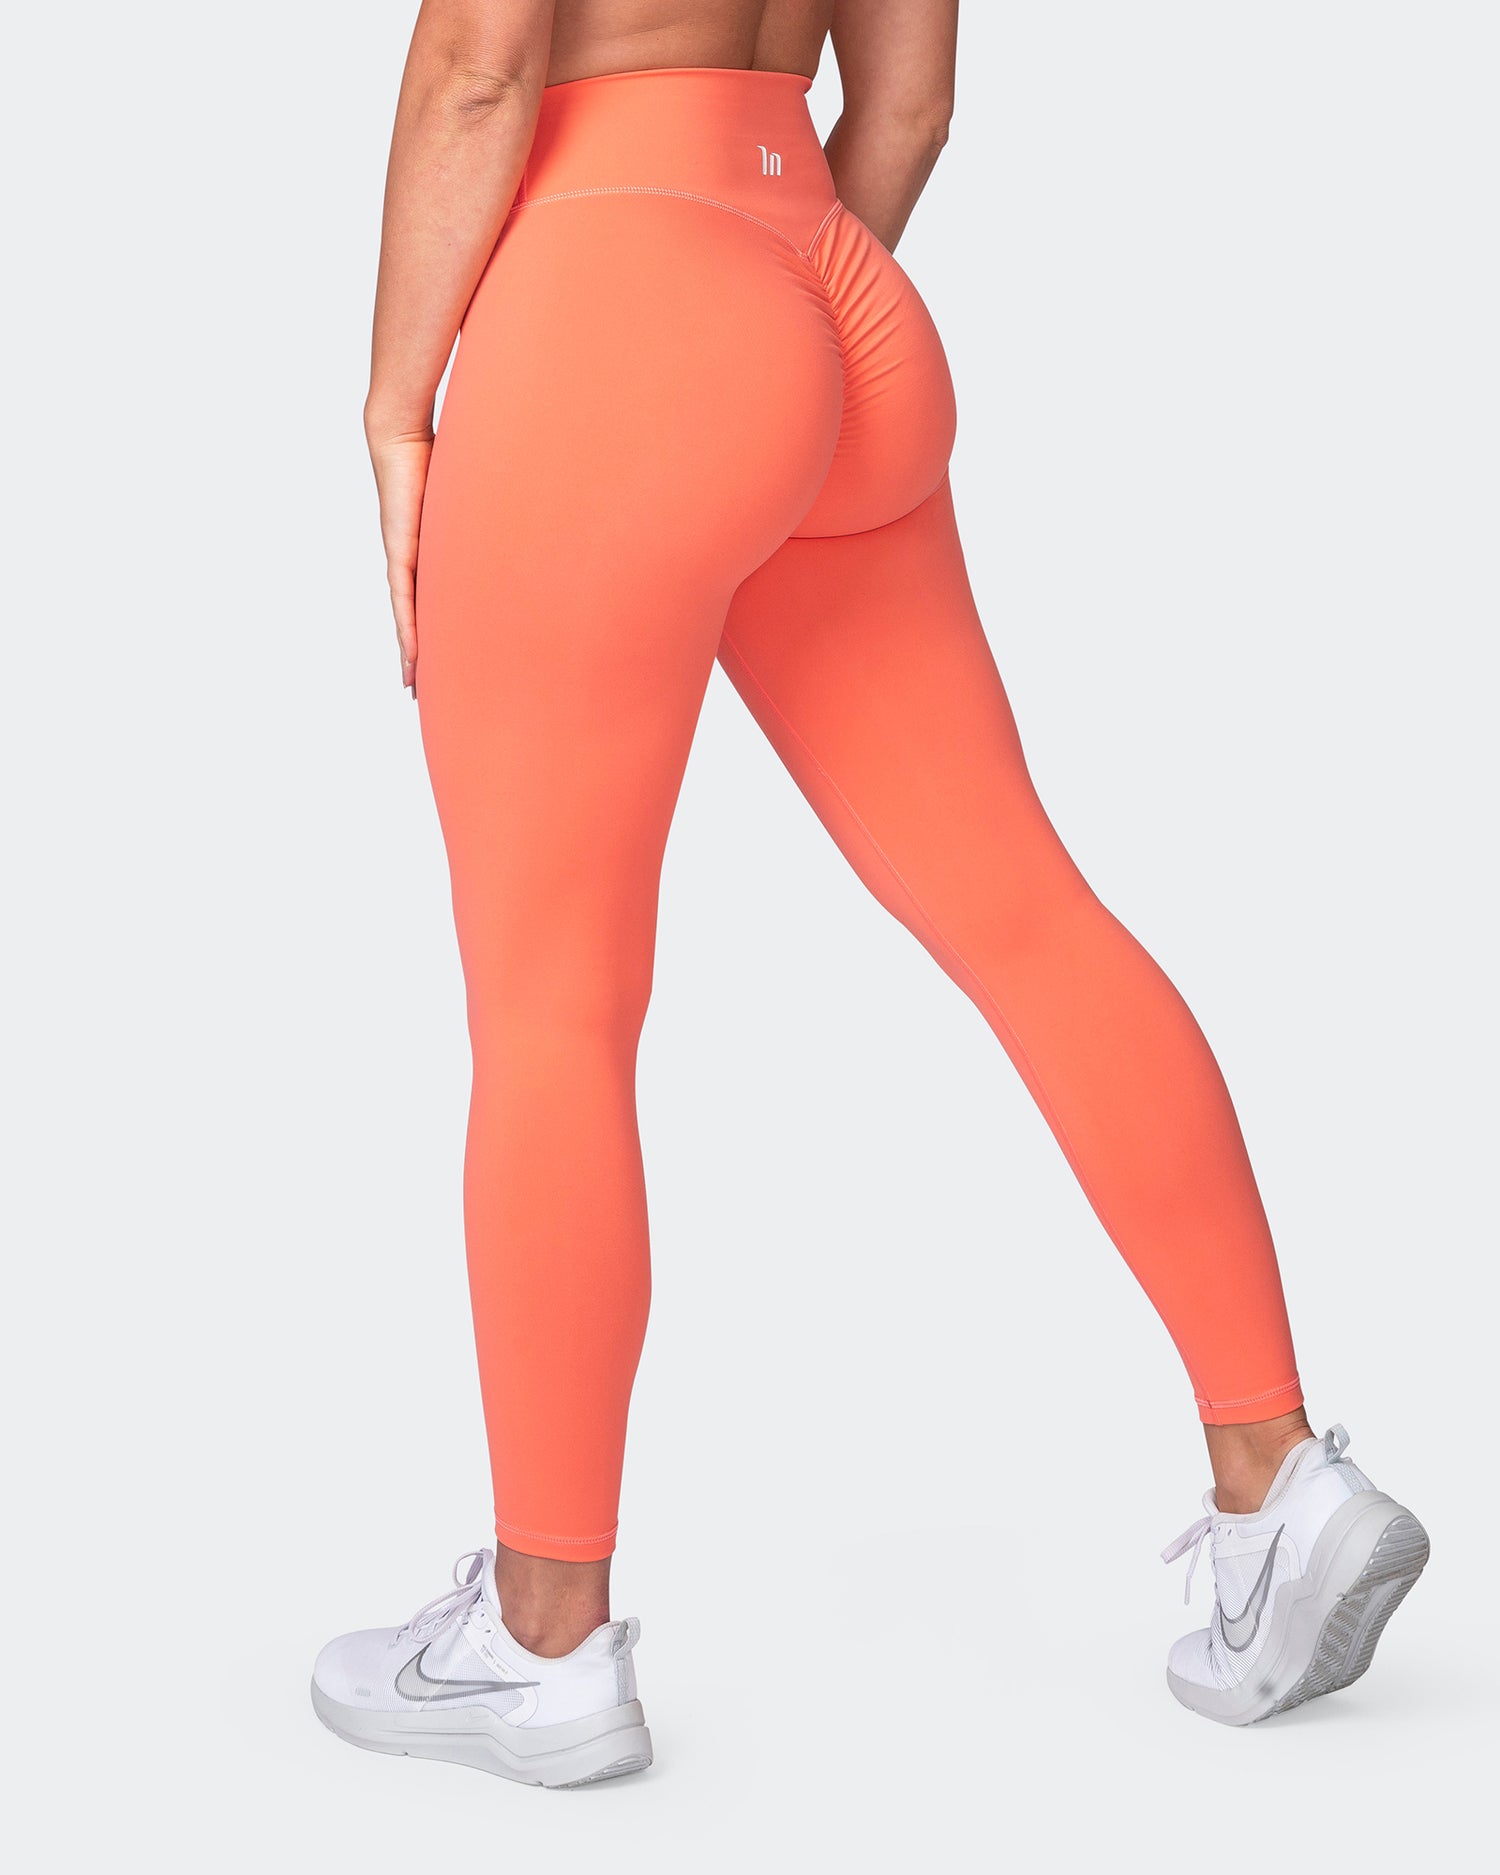 Signature Scrunch Ankle Length Leggings - Hot Coral - Muscle Nation